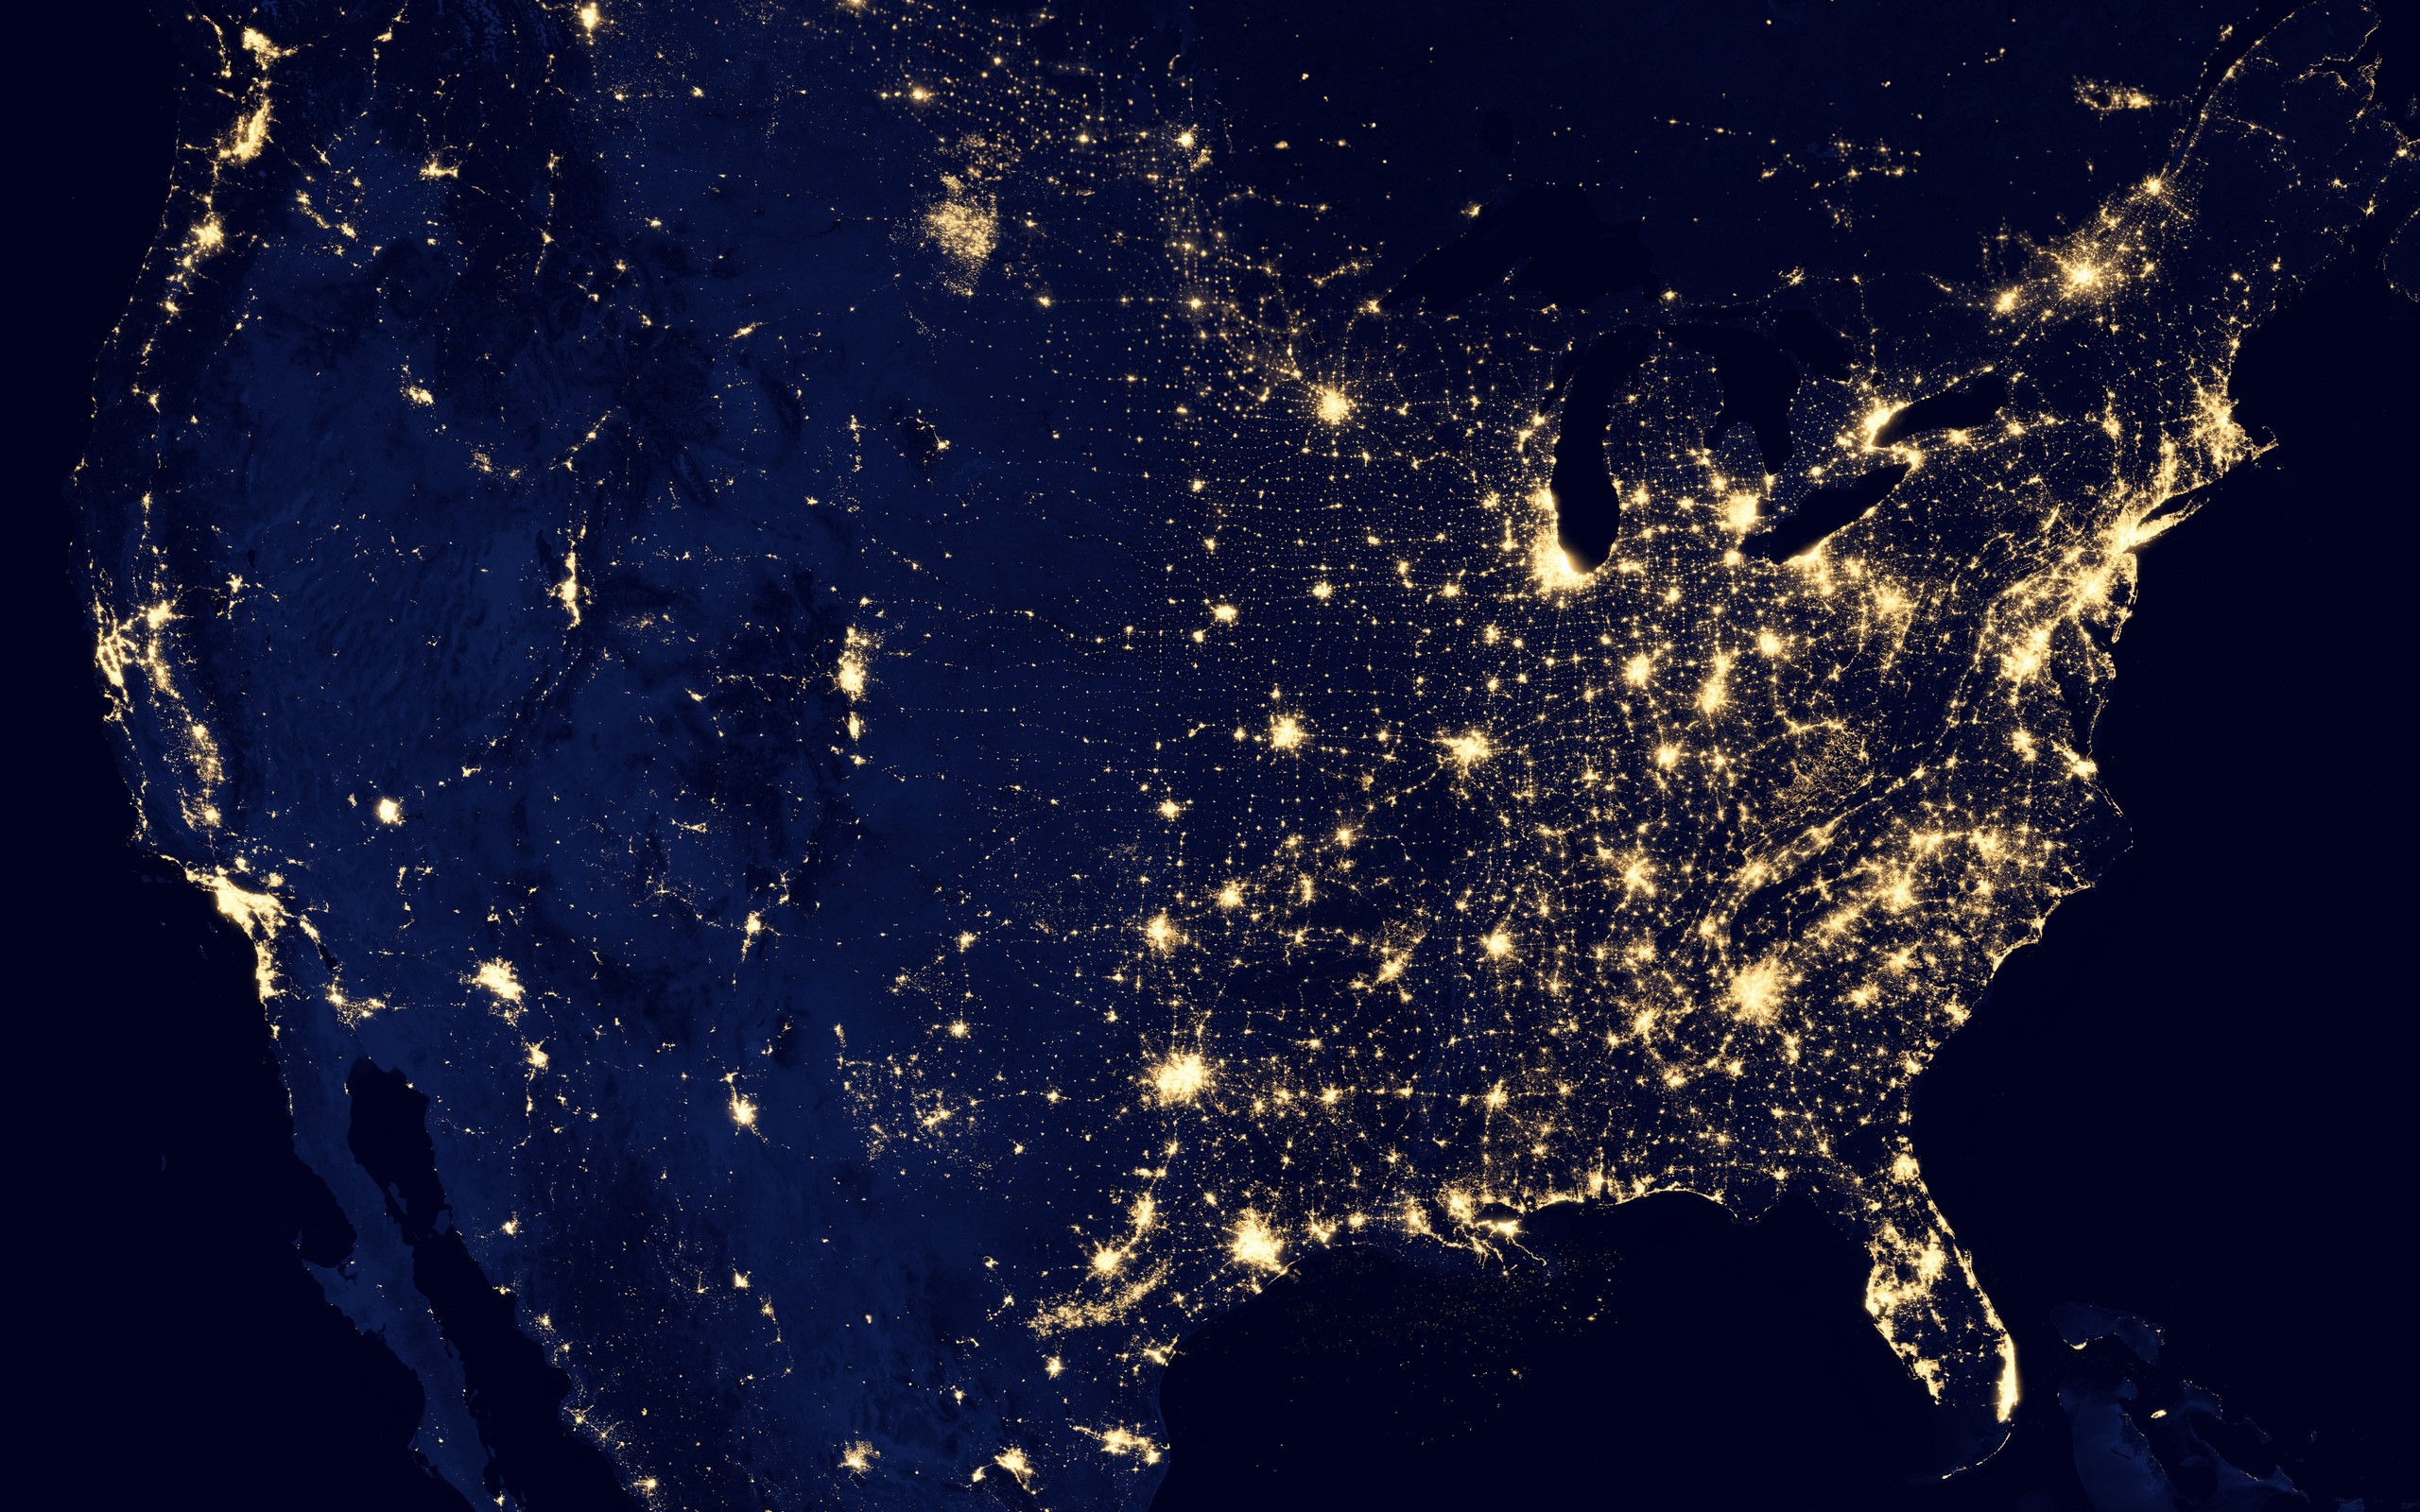 grid, Map, Usa, United, States, Power, Electricity, Night, Lights, Space, America, Cities, Populations, Places, States, Earth, Ocean, Sea, Photography, Nasa, Planets, Sci, Fi, Science Wallpaper HD / Desktop and Mobile Background